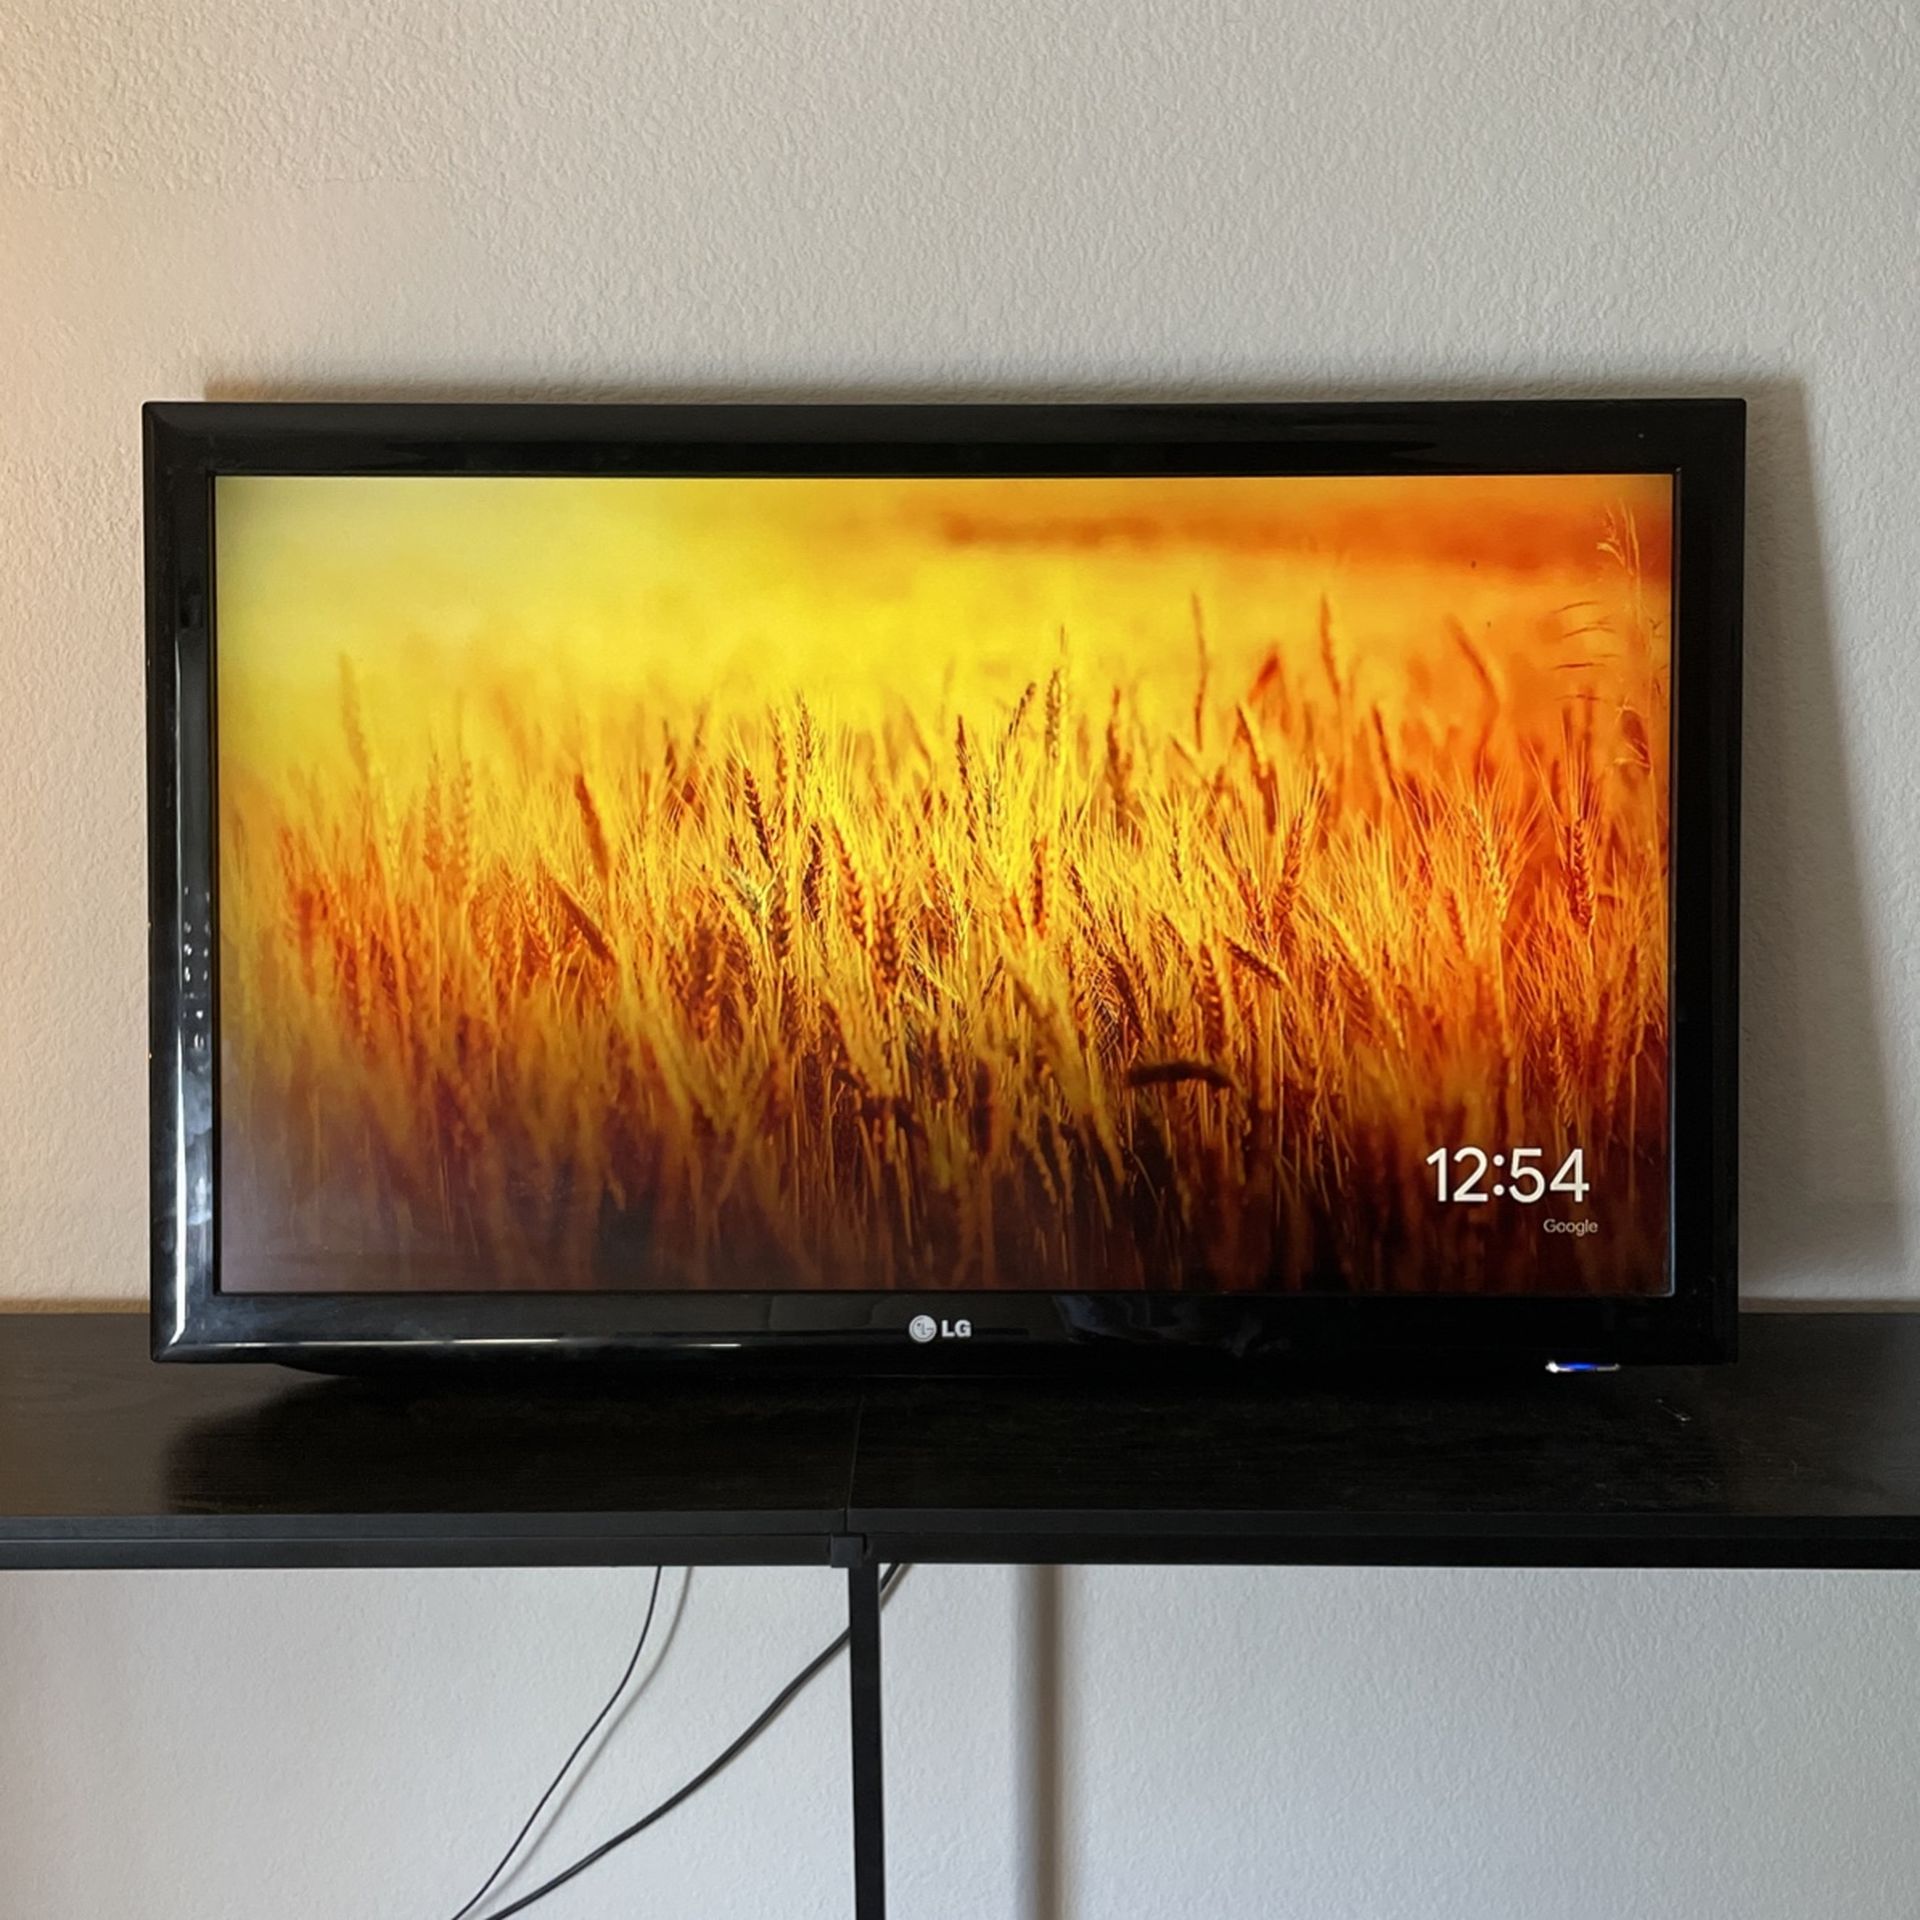 42” LG Tv With Chromecast Attached